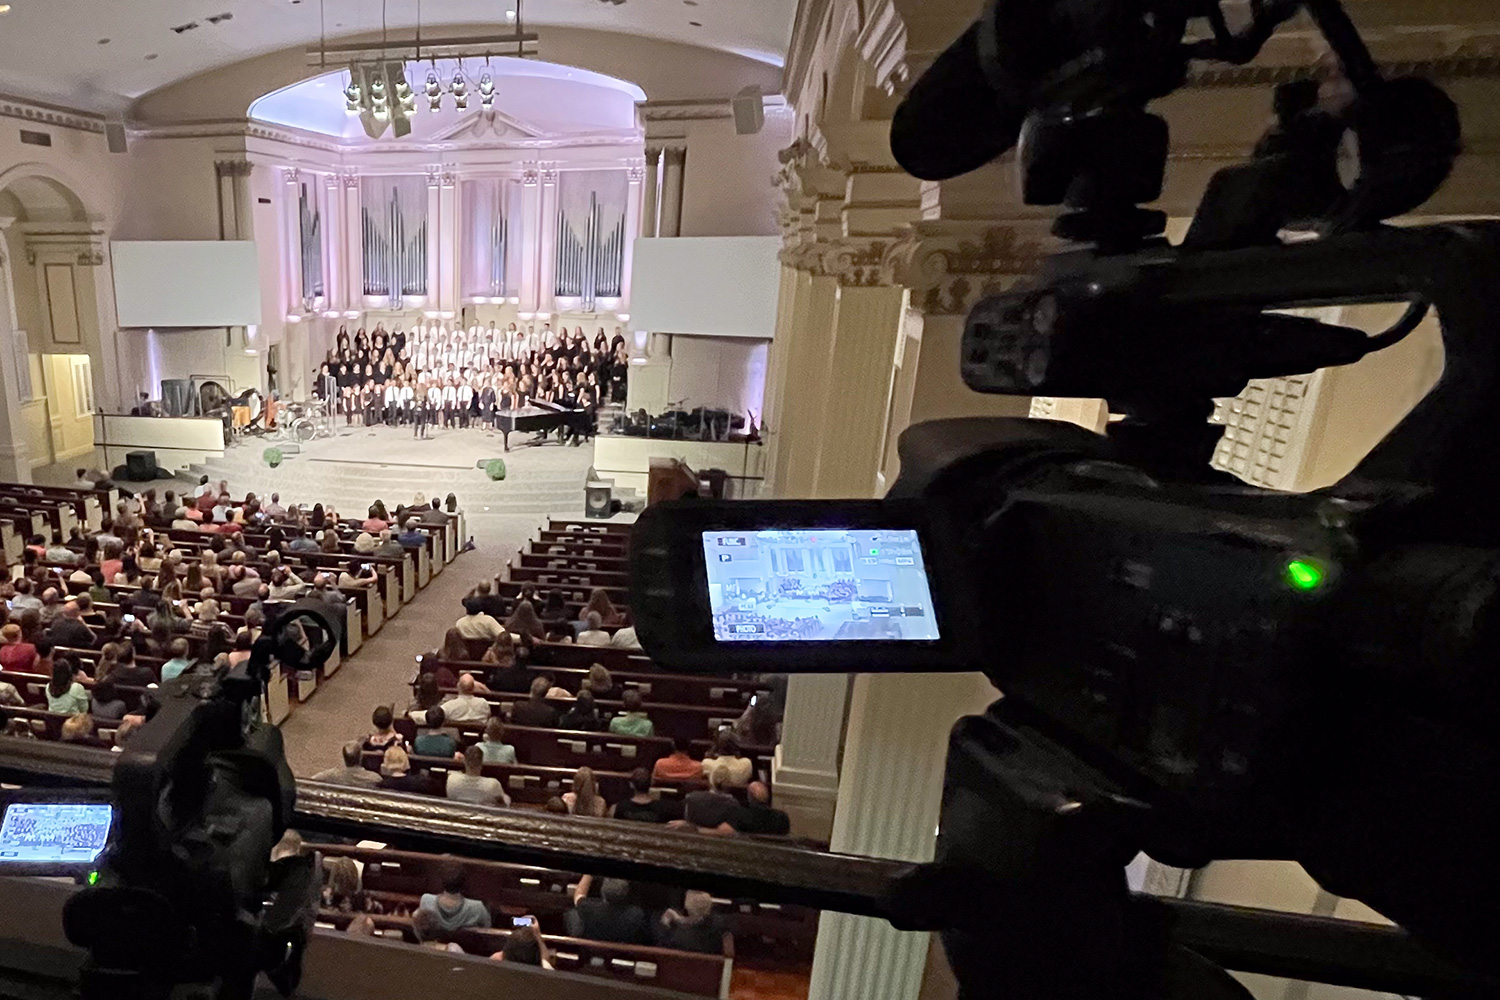 An image of a camera filming a concert in a large church.